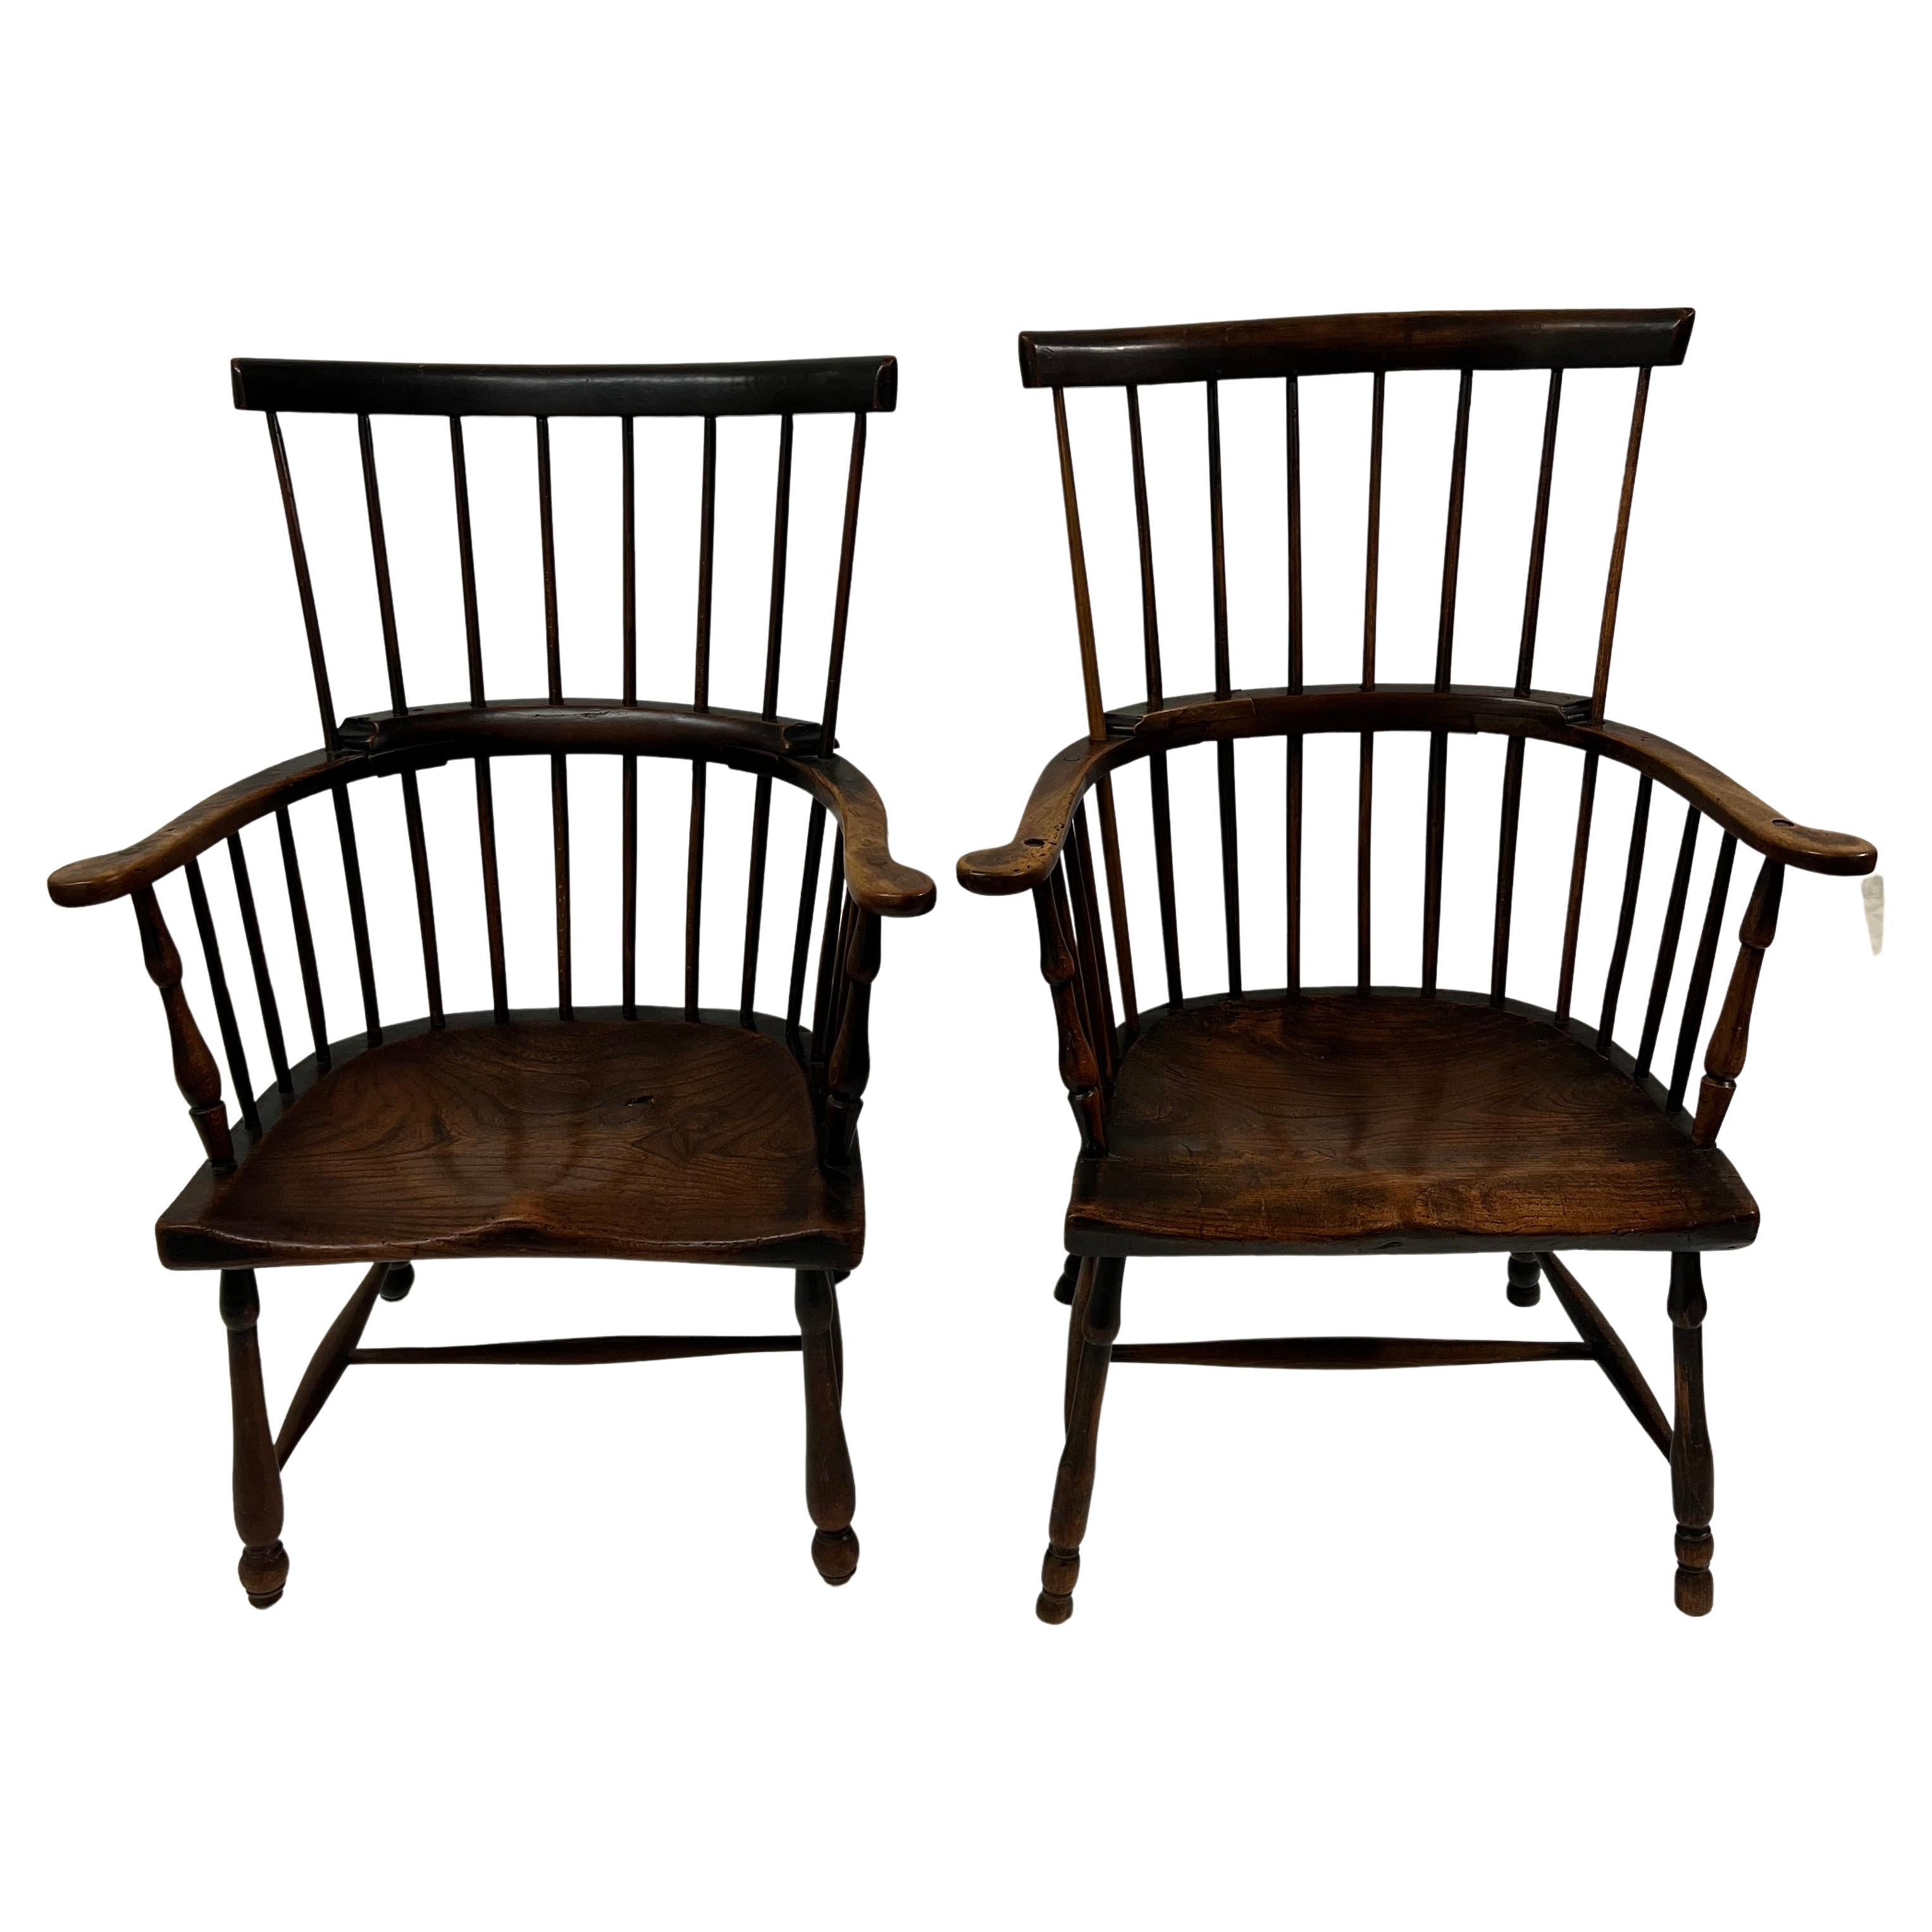 A Pair of Wonderfully patinated Windsor Chairs.  The pair are the most beautiful Windsors we have ever seen.  Perfectly suited for any room, or to be captains chairs at the right table!  The patination is exquisite and the age of the chairs, while